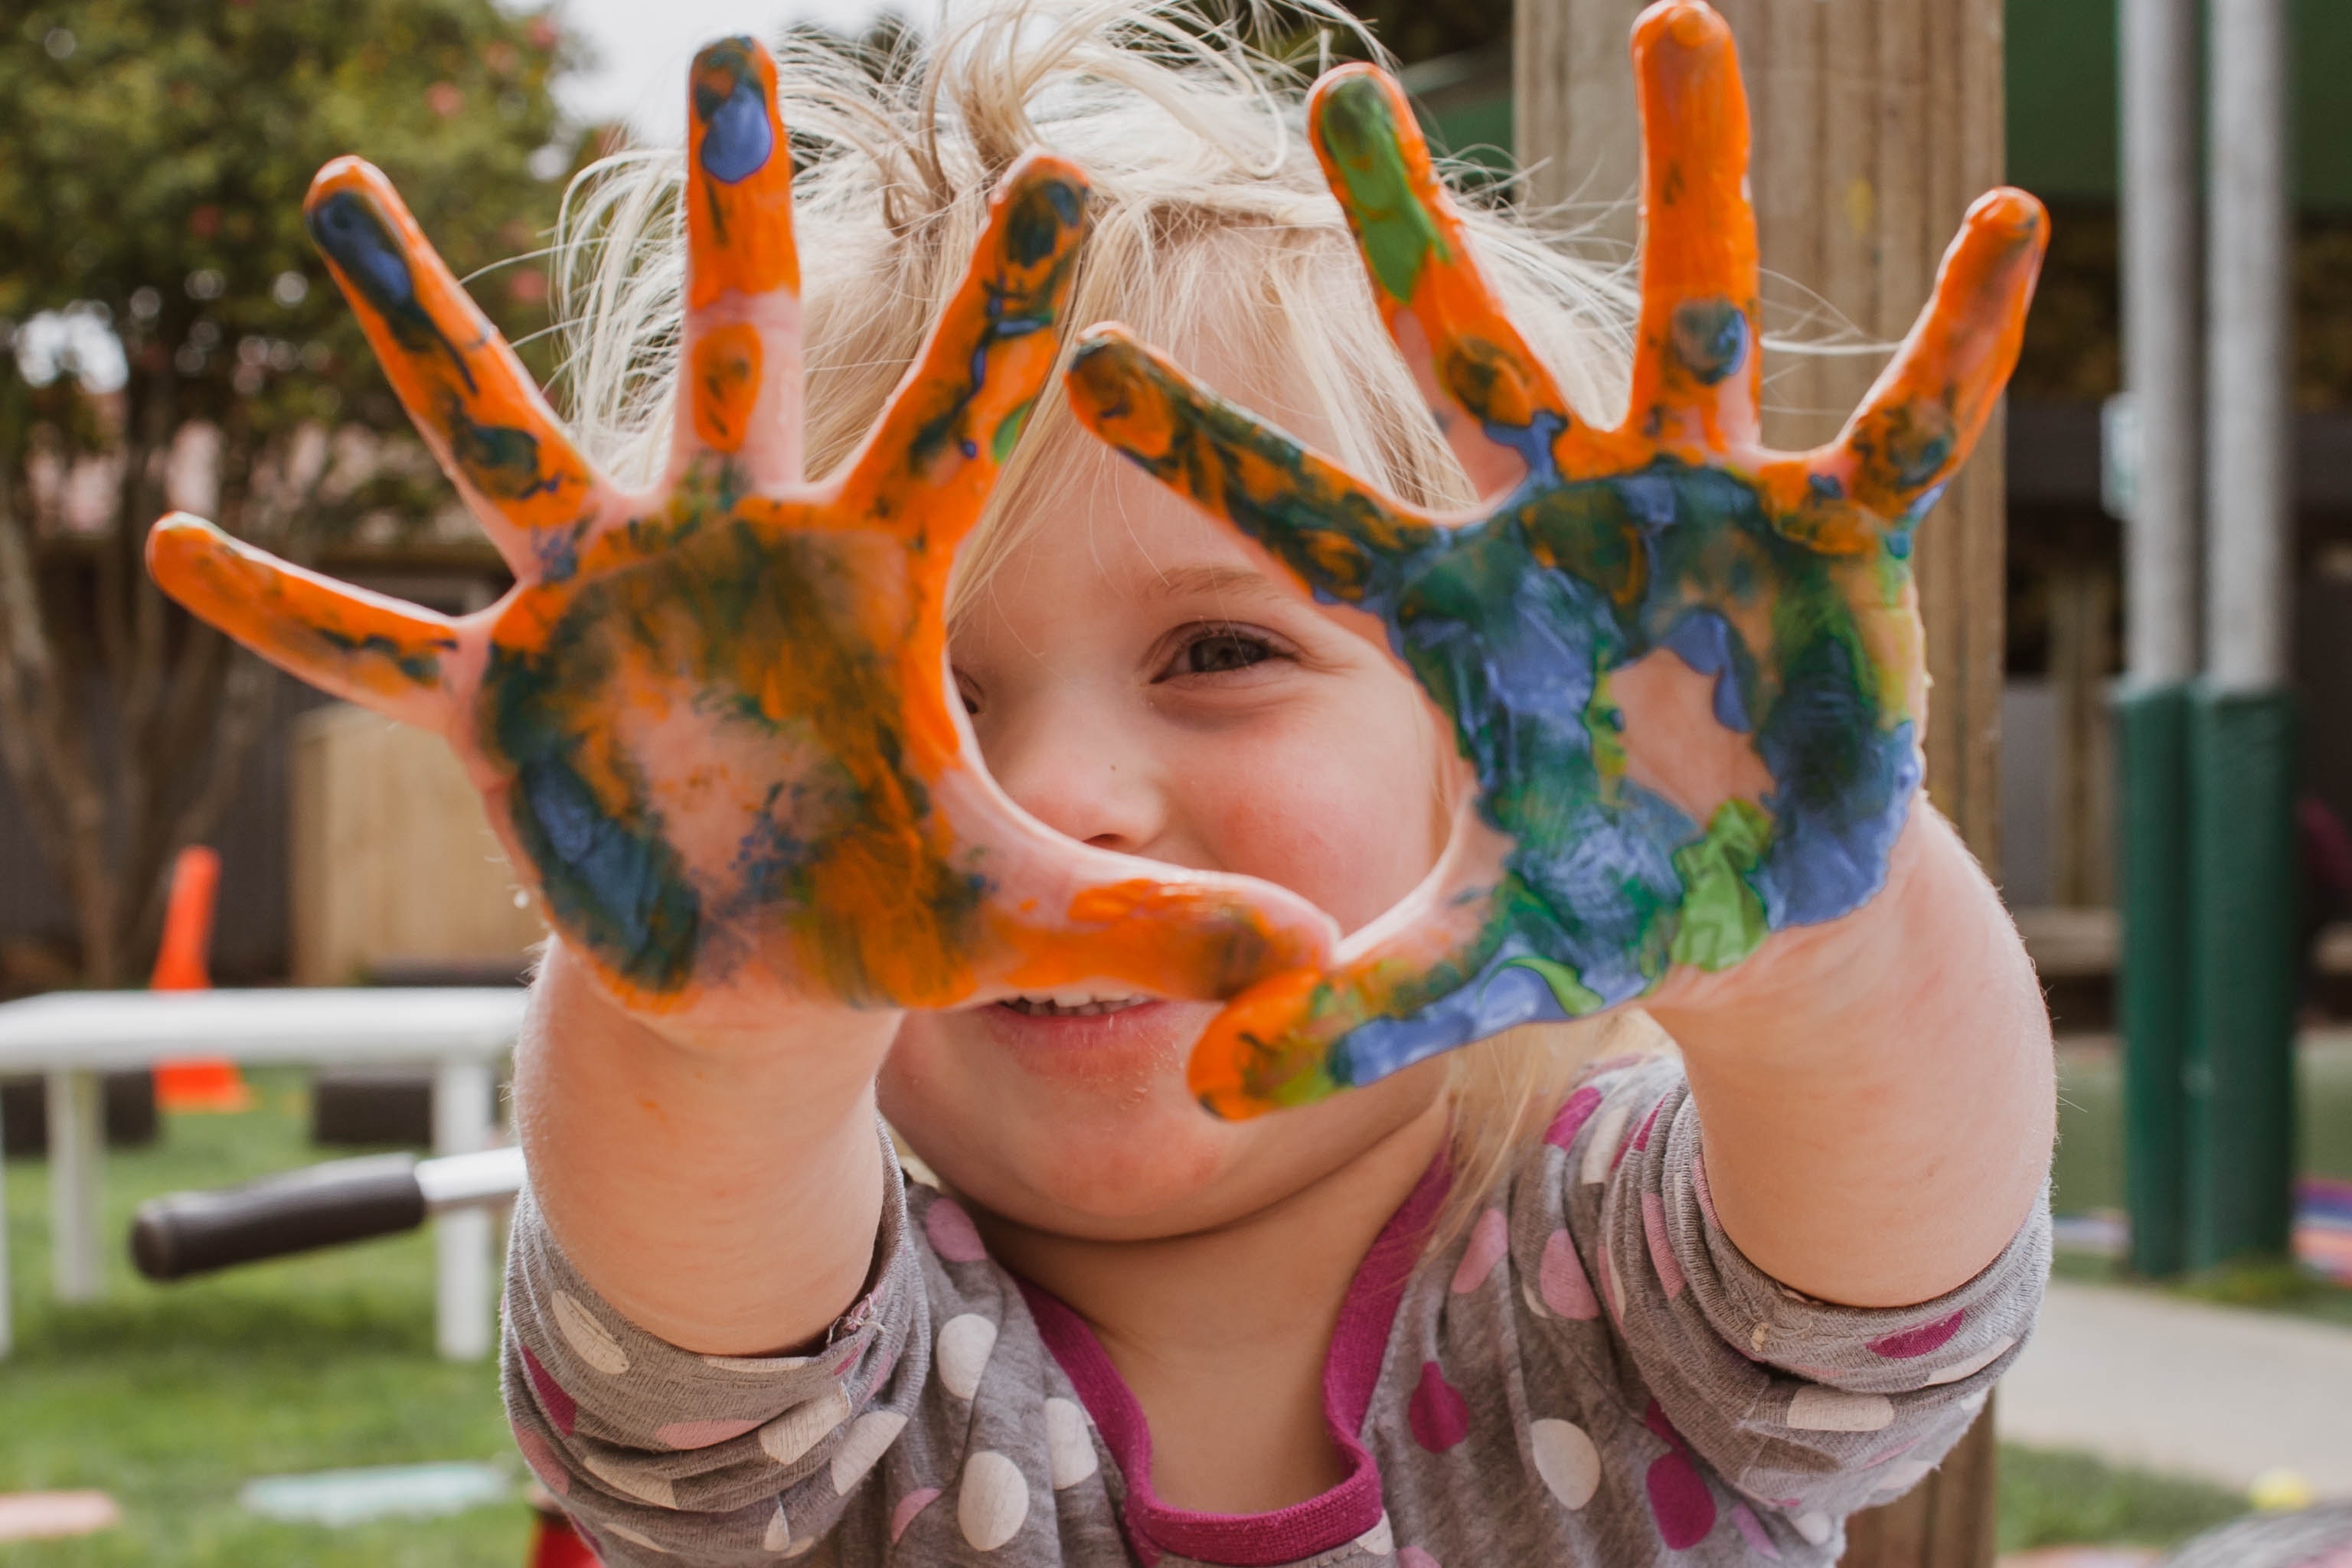 image of child with painted hands